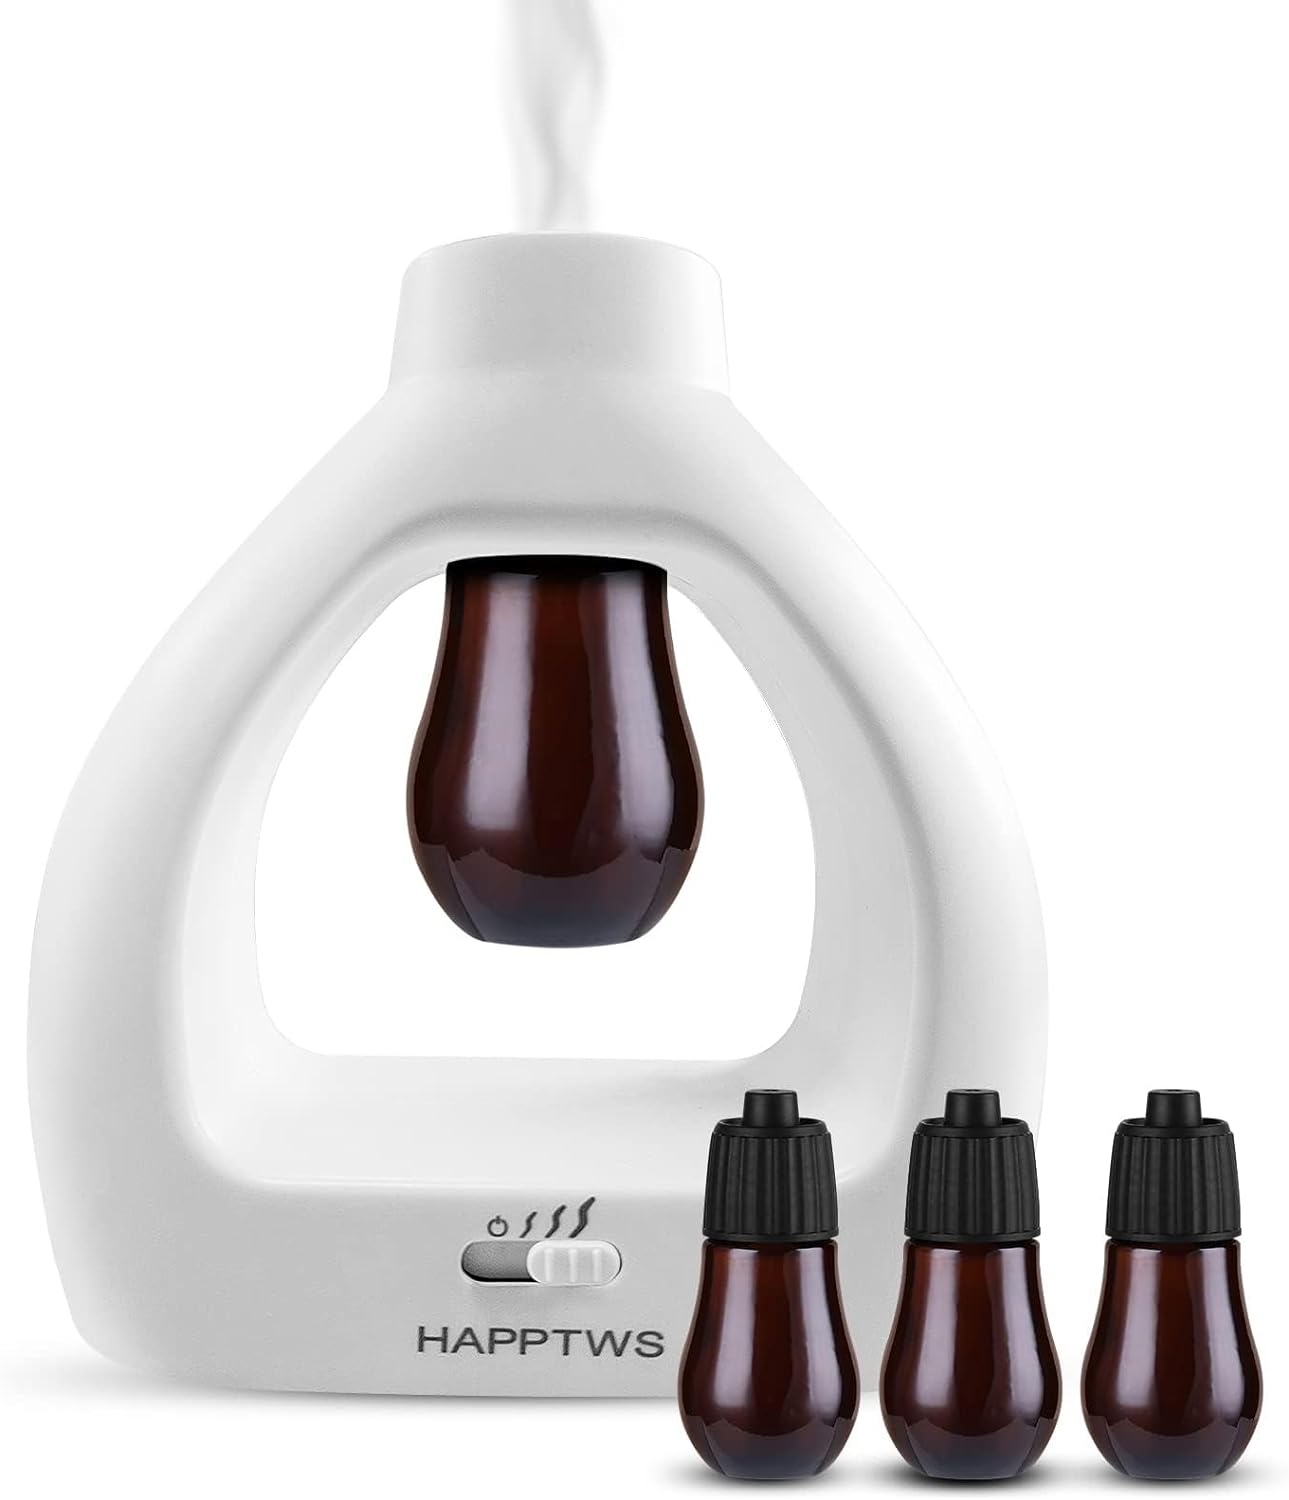 HAPPTWS Waterless Essential Oil Diffuser - 3 Time Settings, Adjustable Mist, Rechargeable & Portable - Ideal for Bedroom, Yoga Room, Office